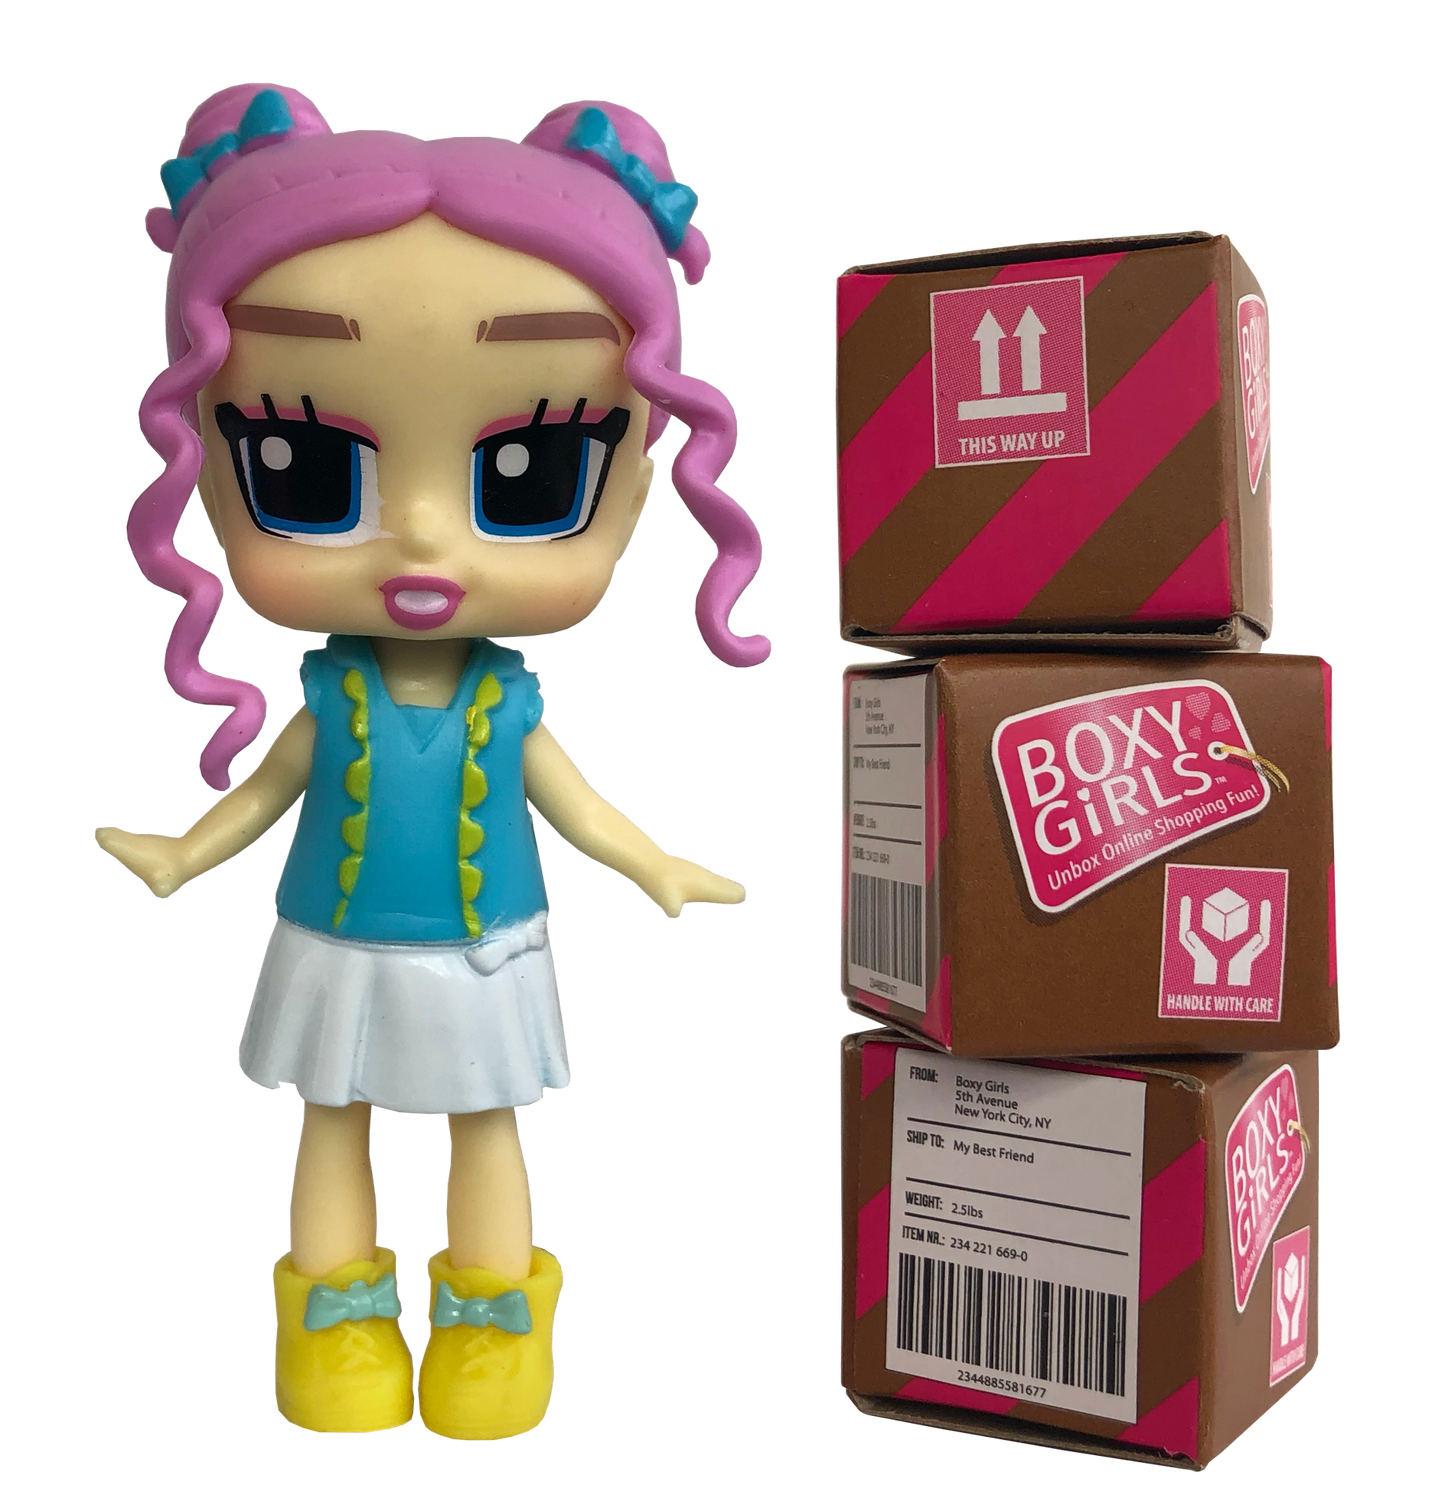 Boxy Girls Mini Dolls - Feature 3 Boxes to Unbox 4 Surprise Accessories (Tasha, Coco, Lina, Trinity, Ellie, Bee) 3 Inch